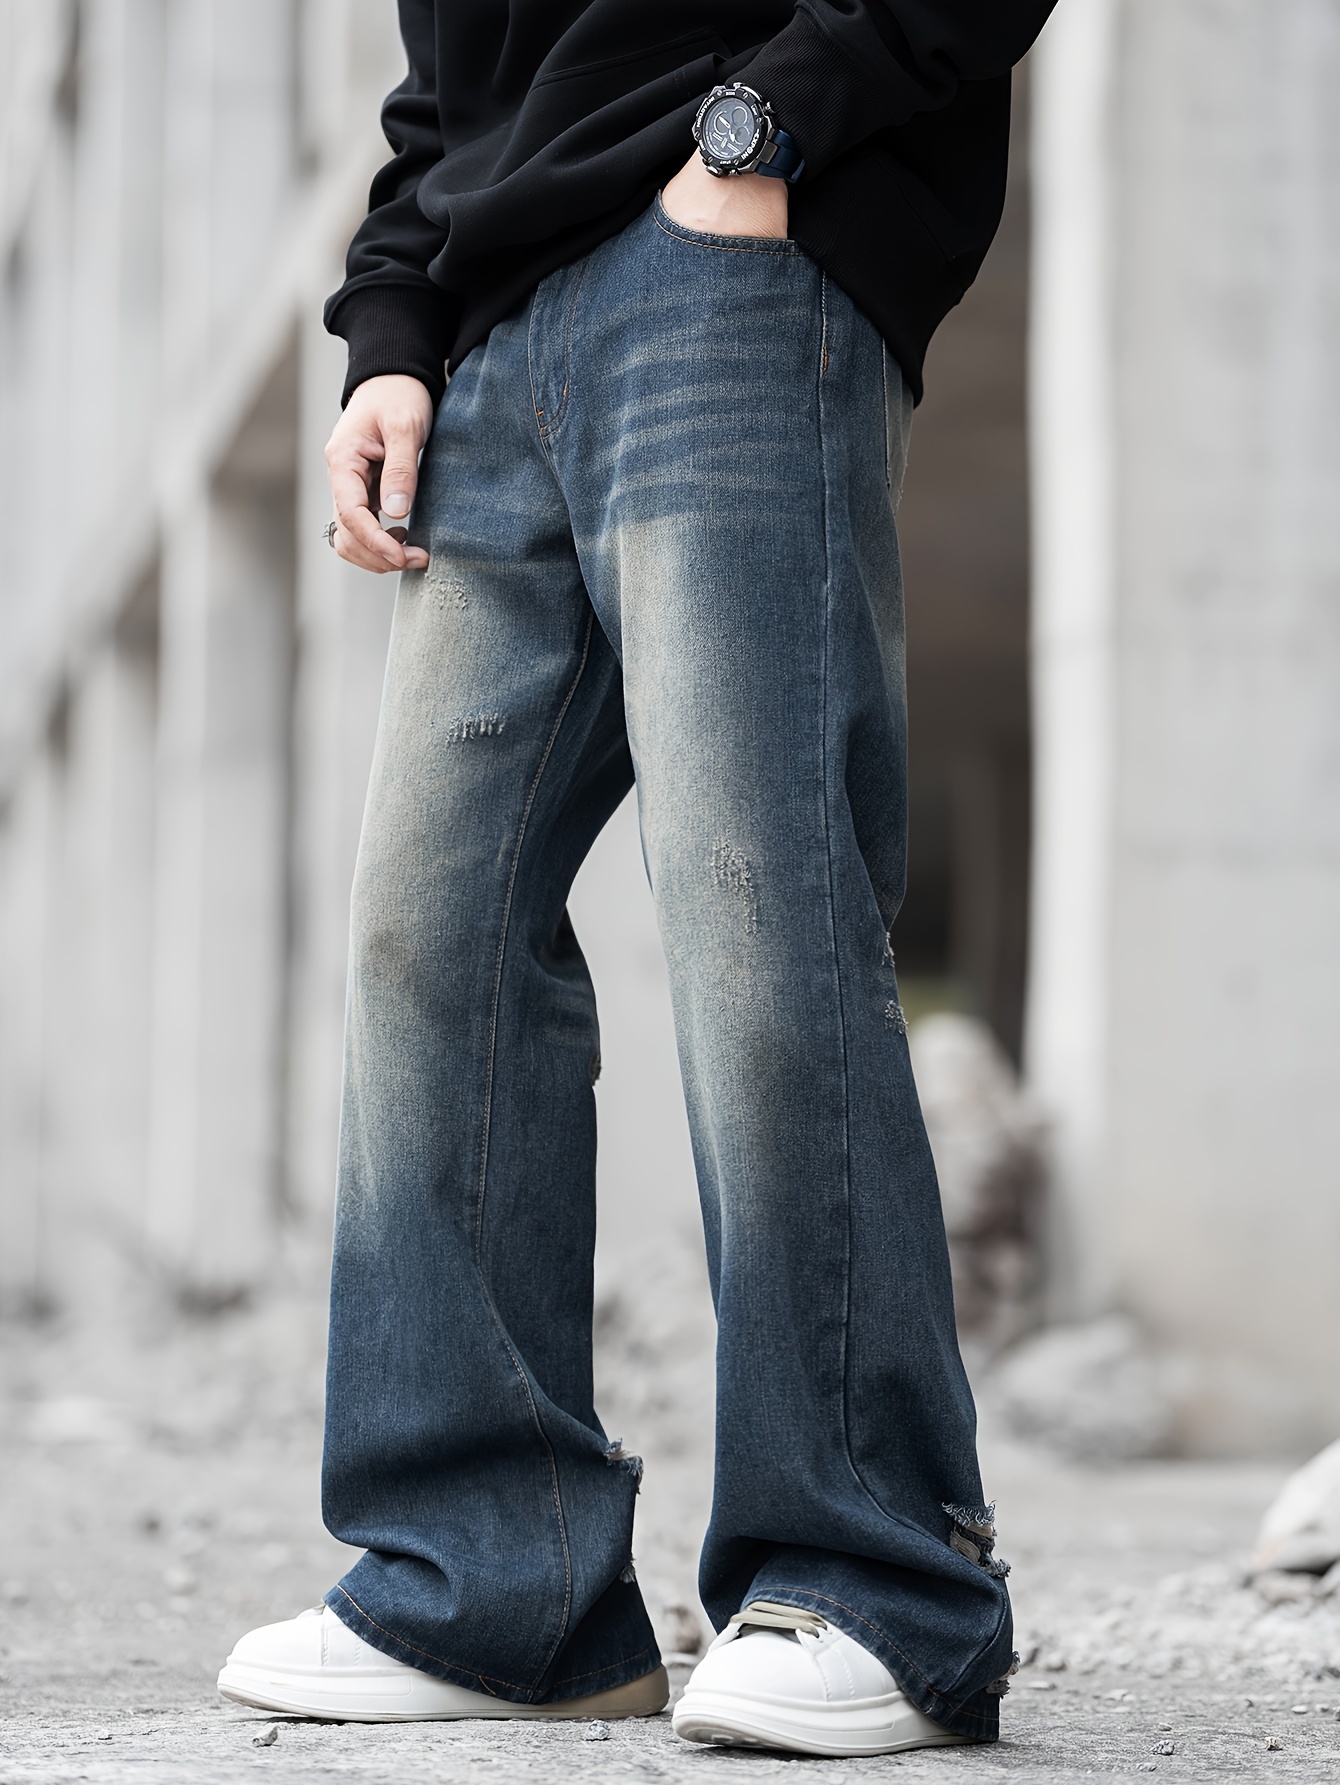 Men's Casual Loose Fit Jeans, Street Style Retro Distressed Flared Jeans